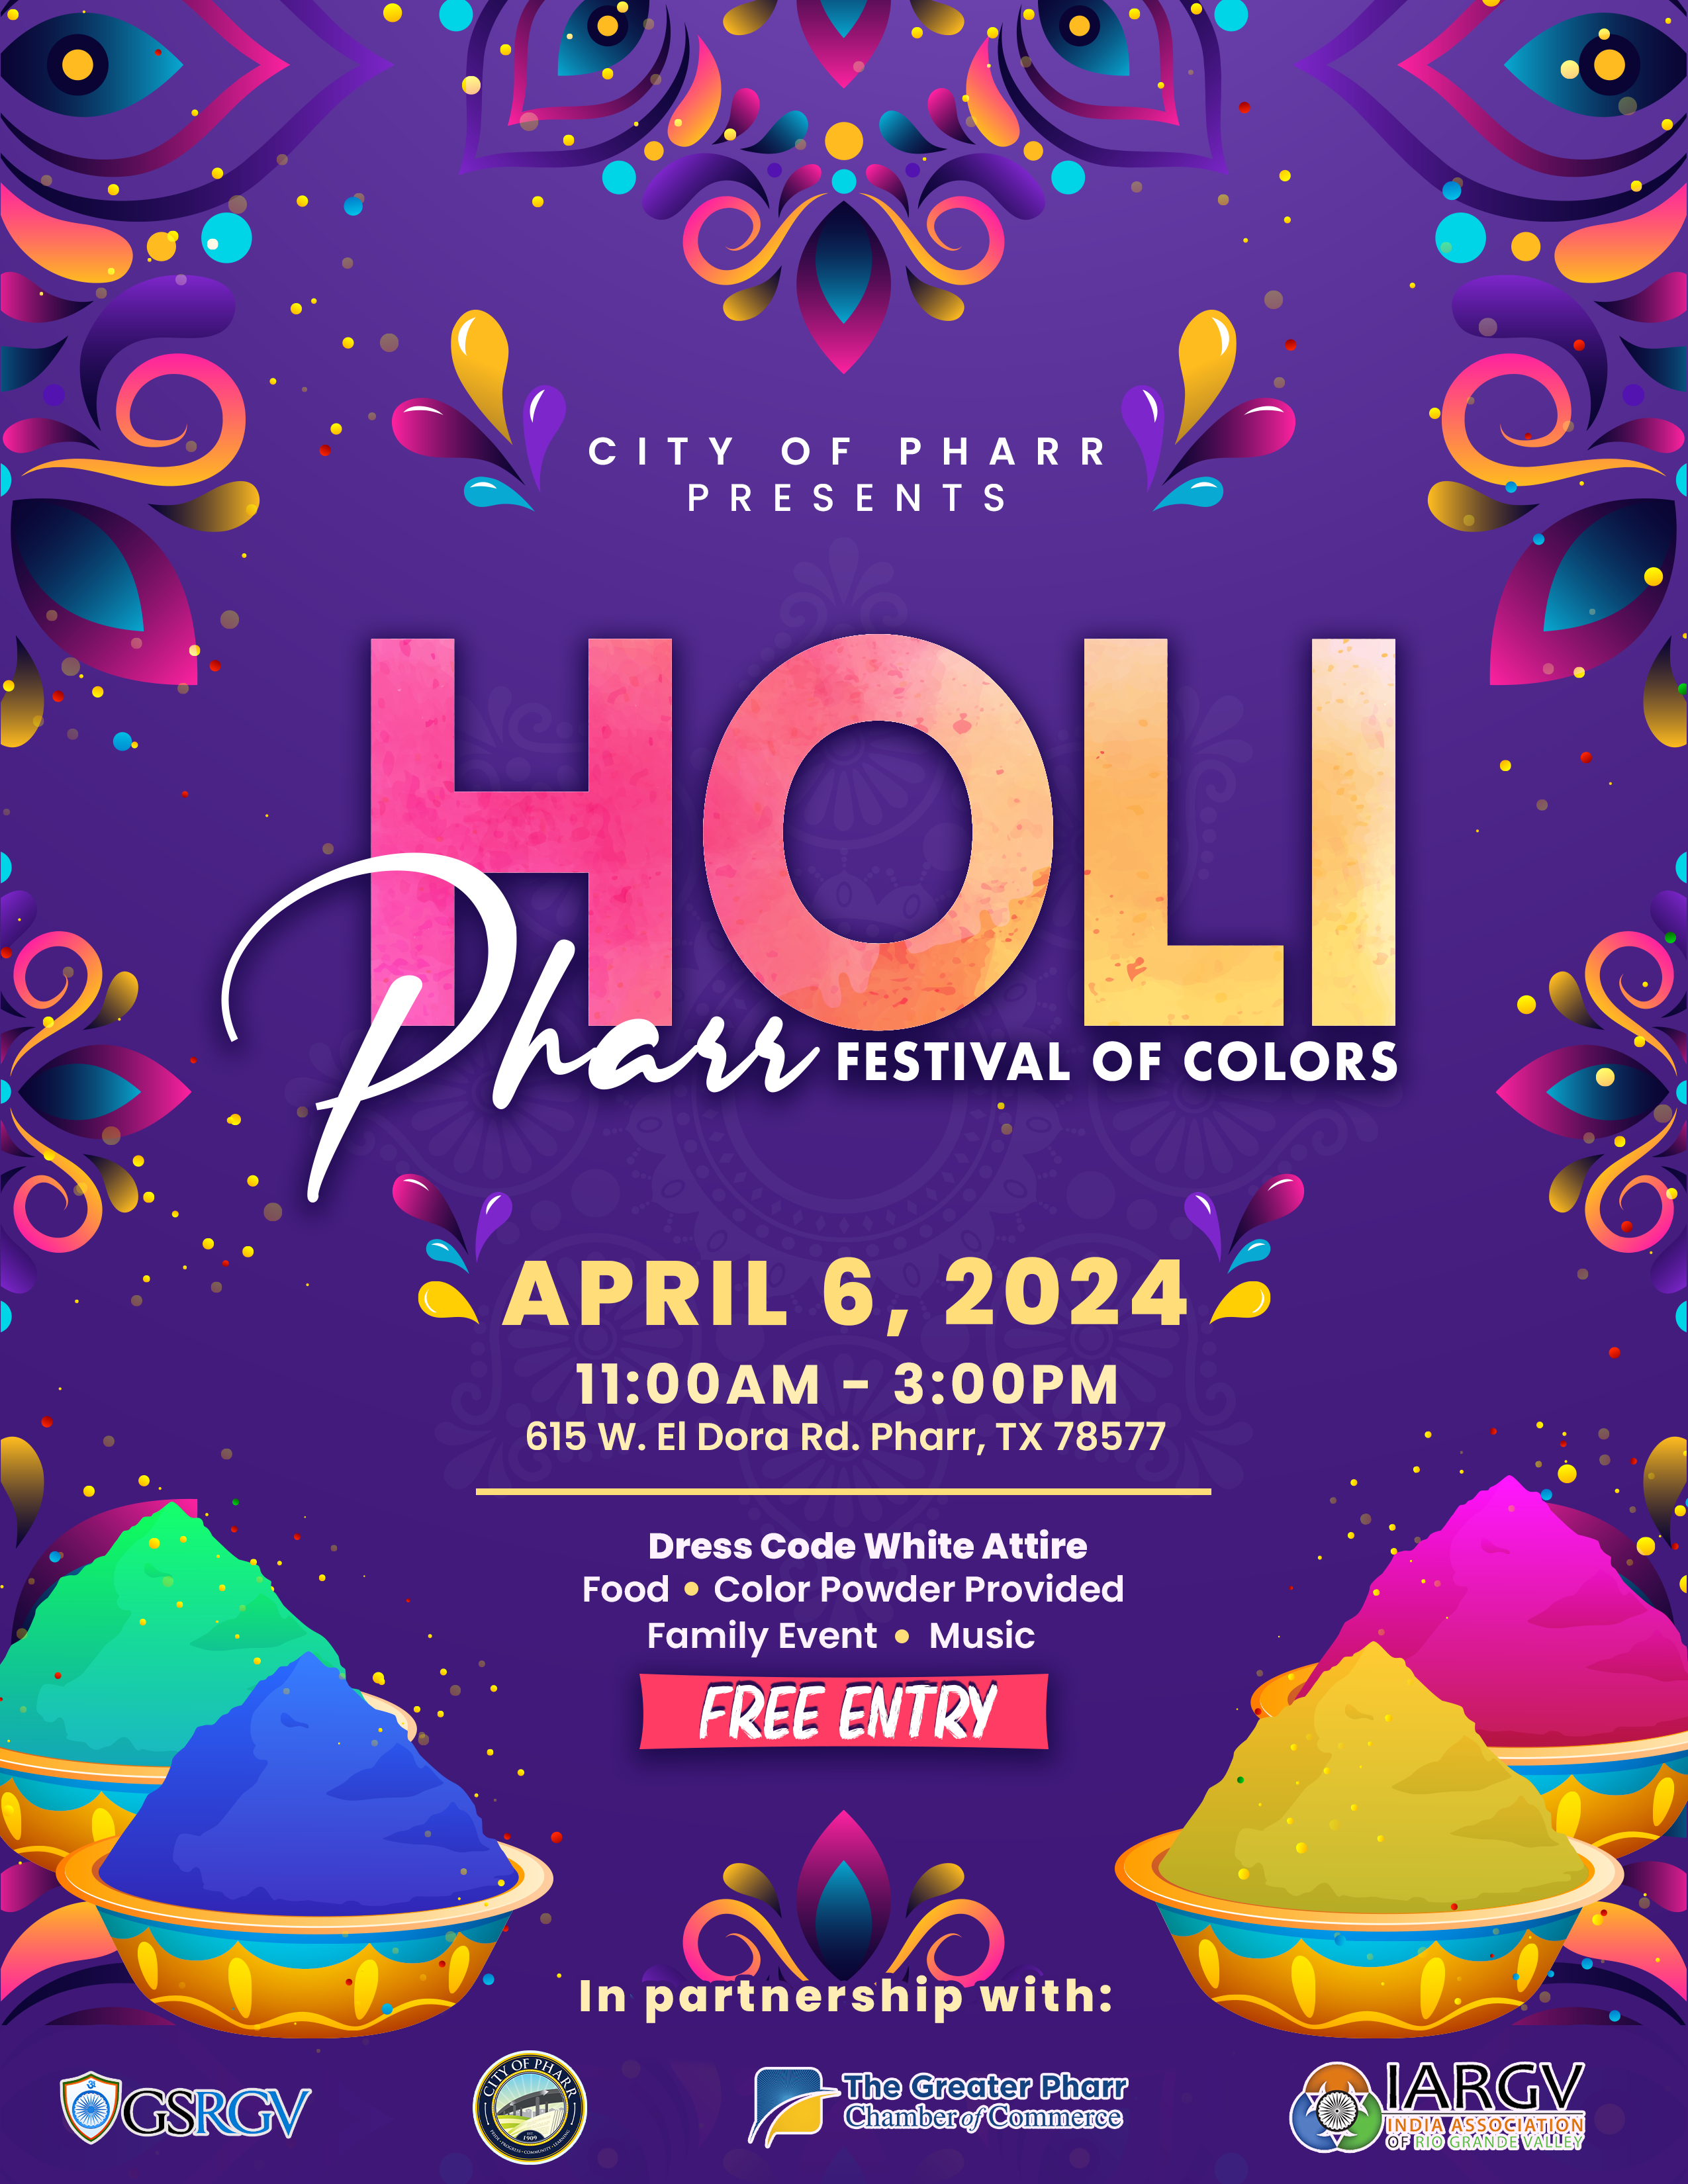 Experience the Vibrancy of Holi: A Festival of Colors, Love, and Spring